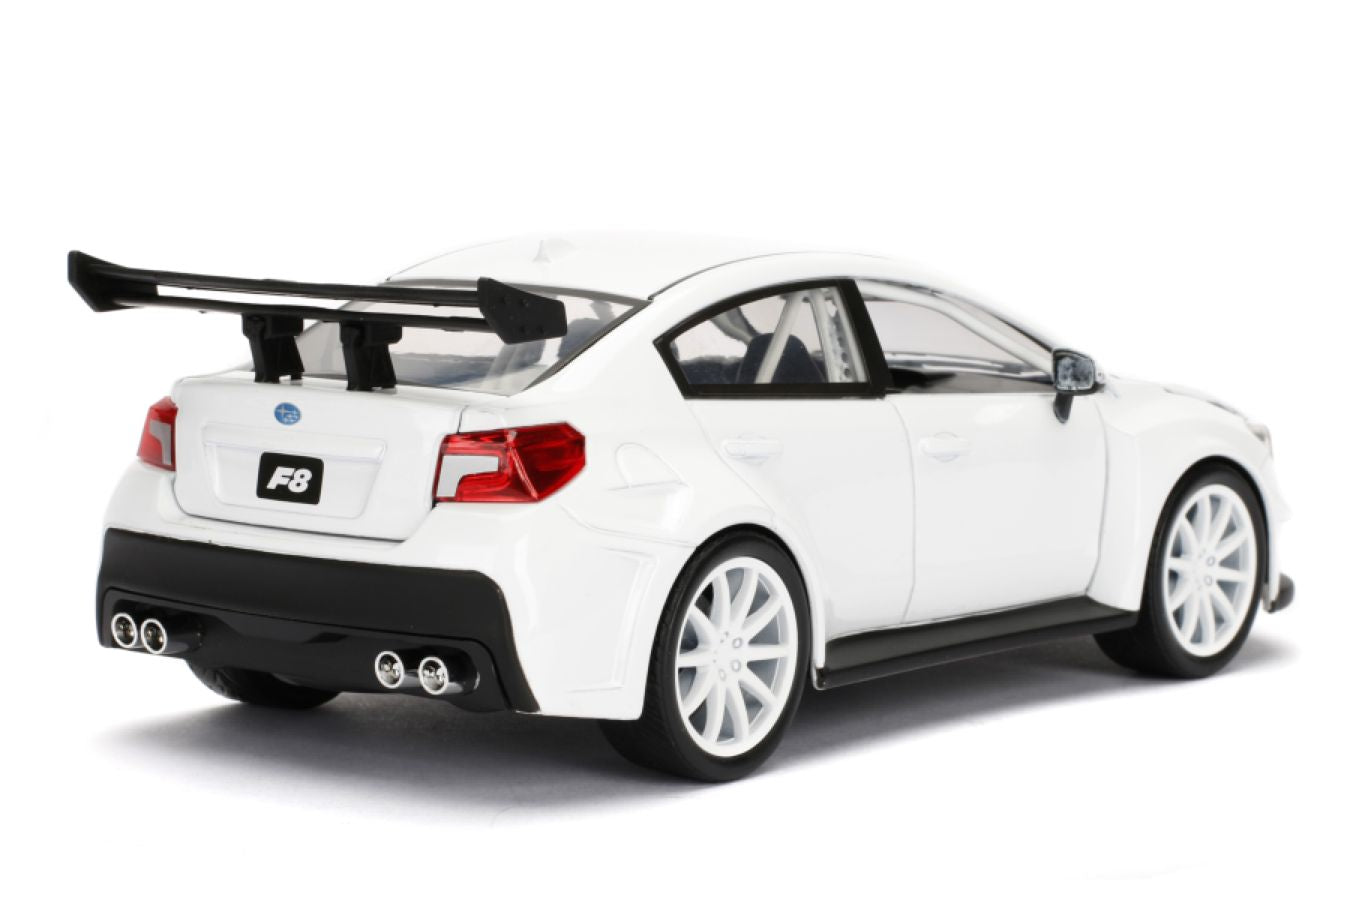 Fast and Furious 8 - Mr Little Nobody's Subaru WRX STI 1:24 Scale Hollywood Ride